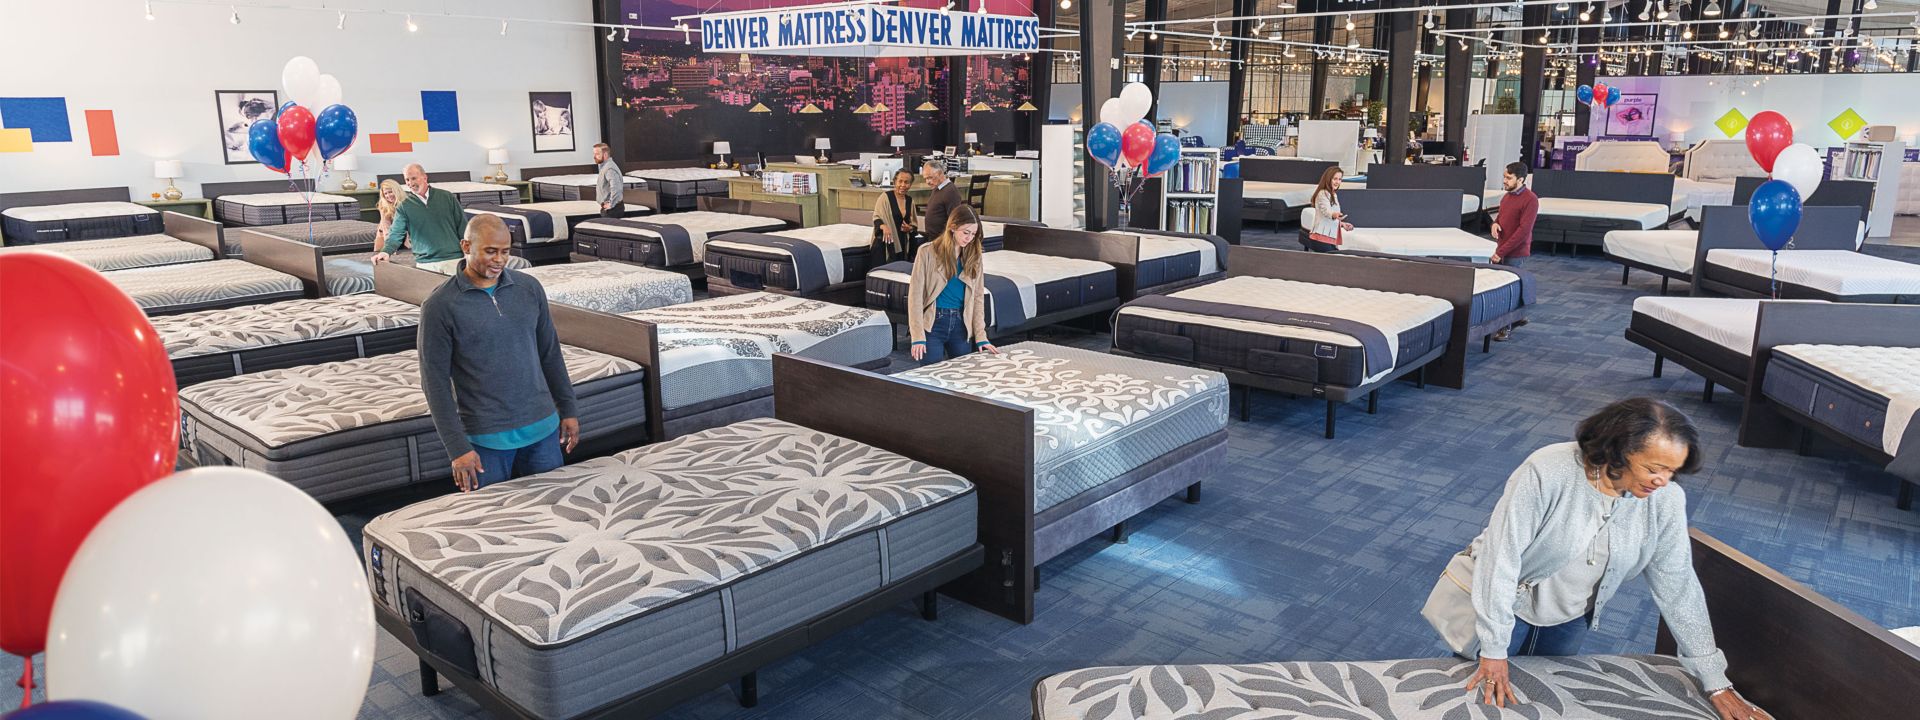 Denver Mattress 4th of July in Store